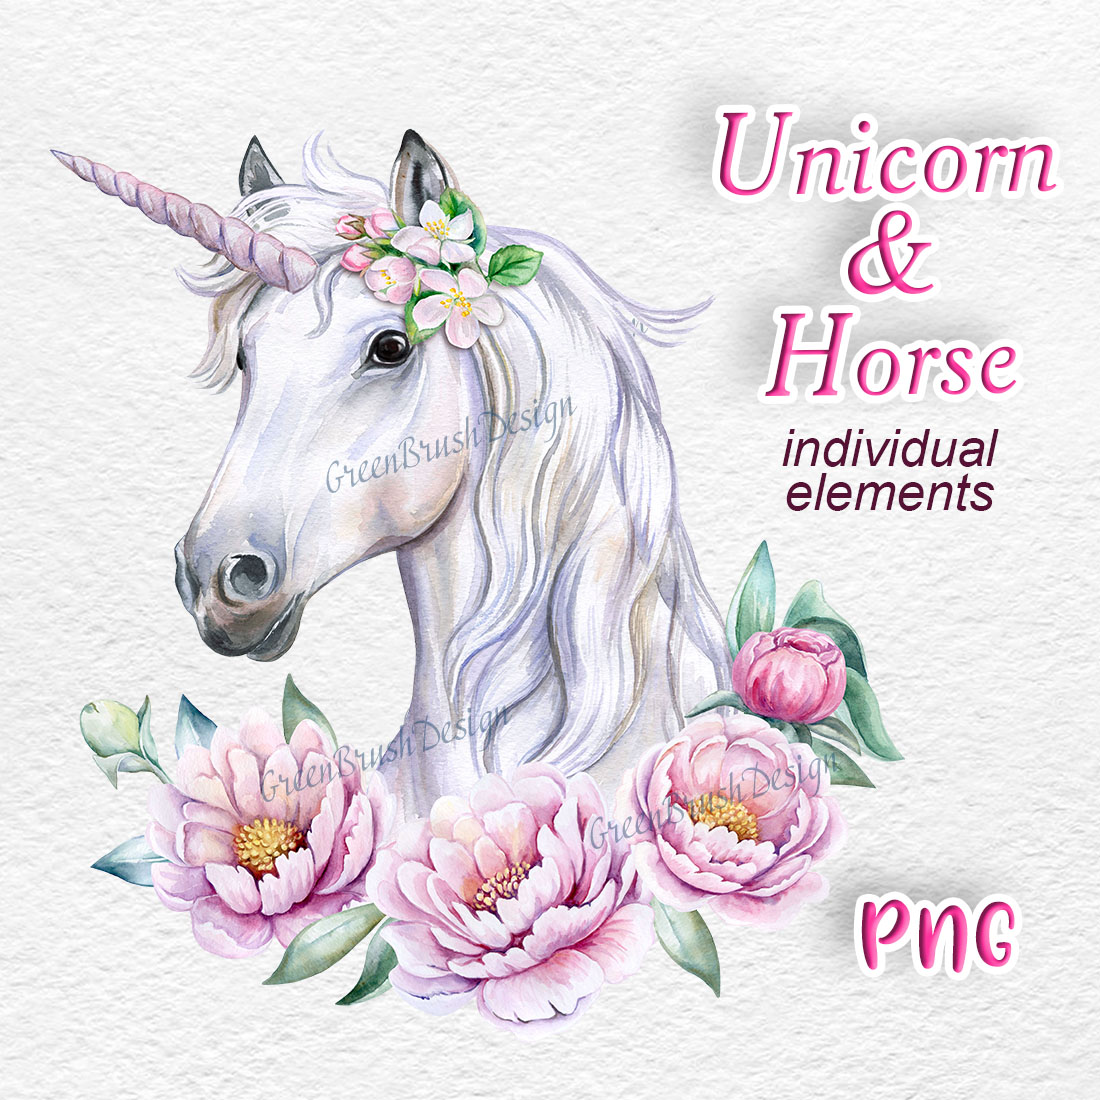 Watercolor Unicorn Face with Flowers Frame cover image.